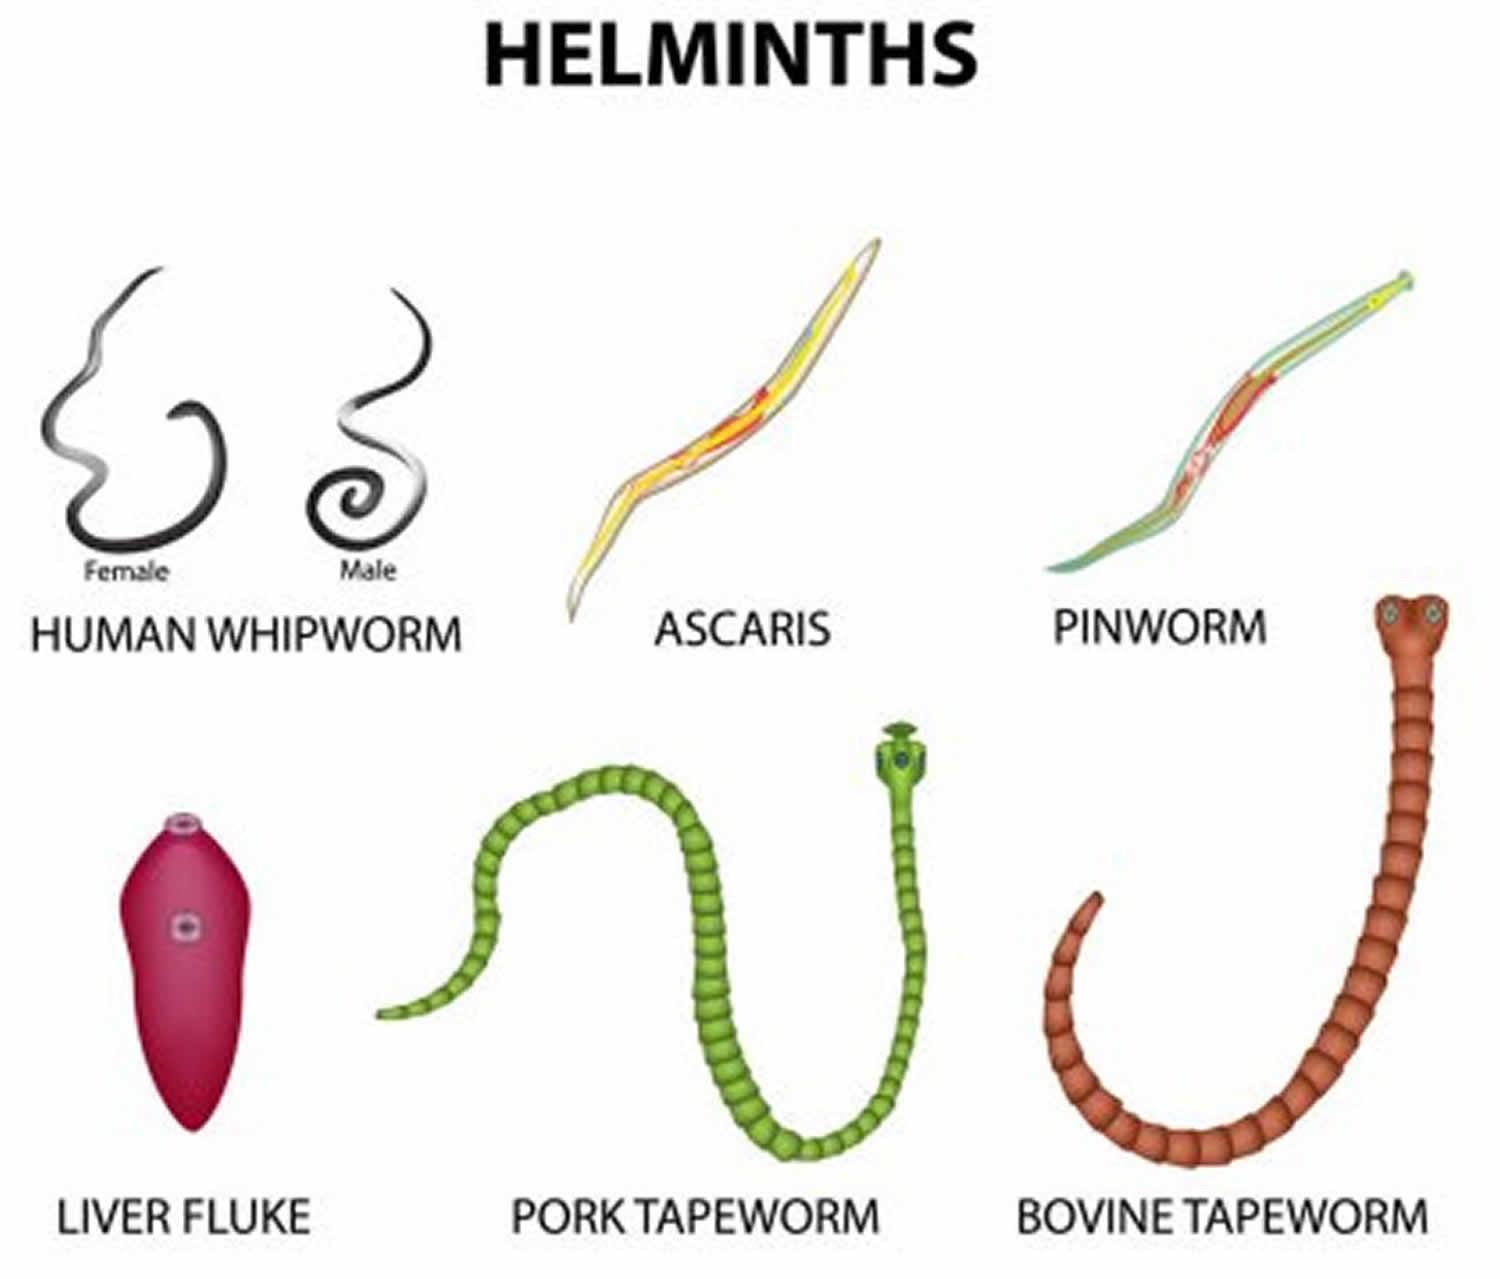 Helminth infection signs and symptoms